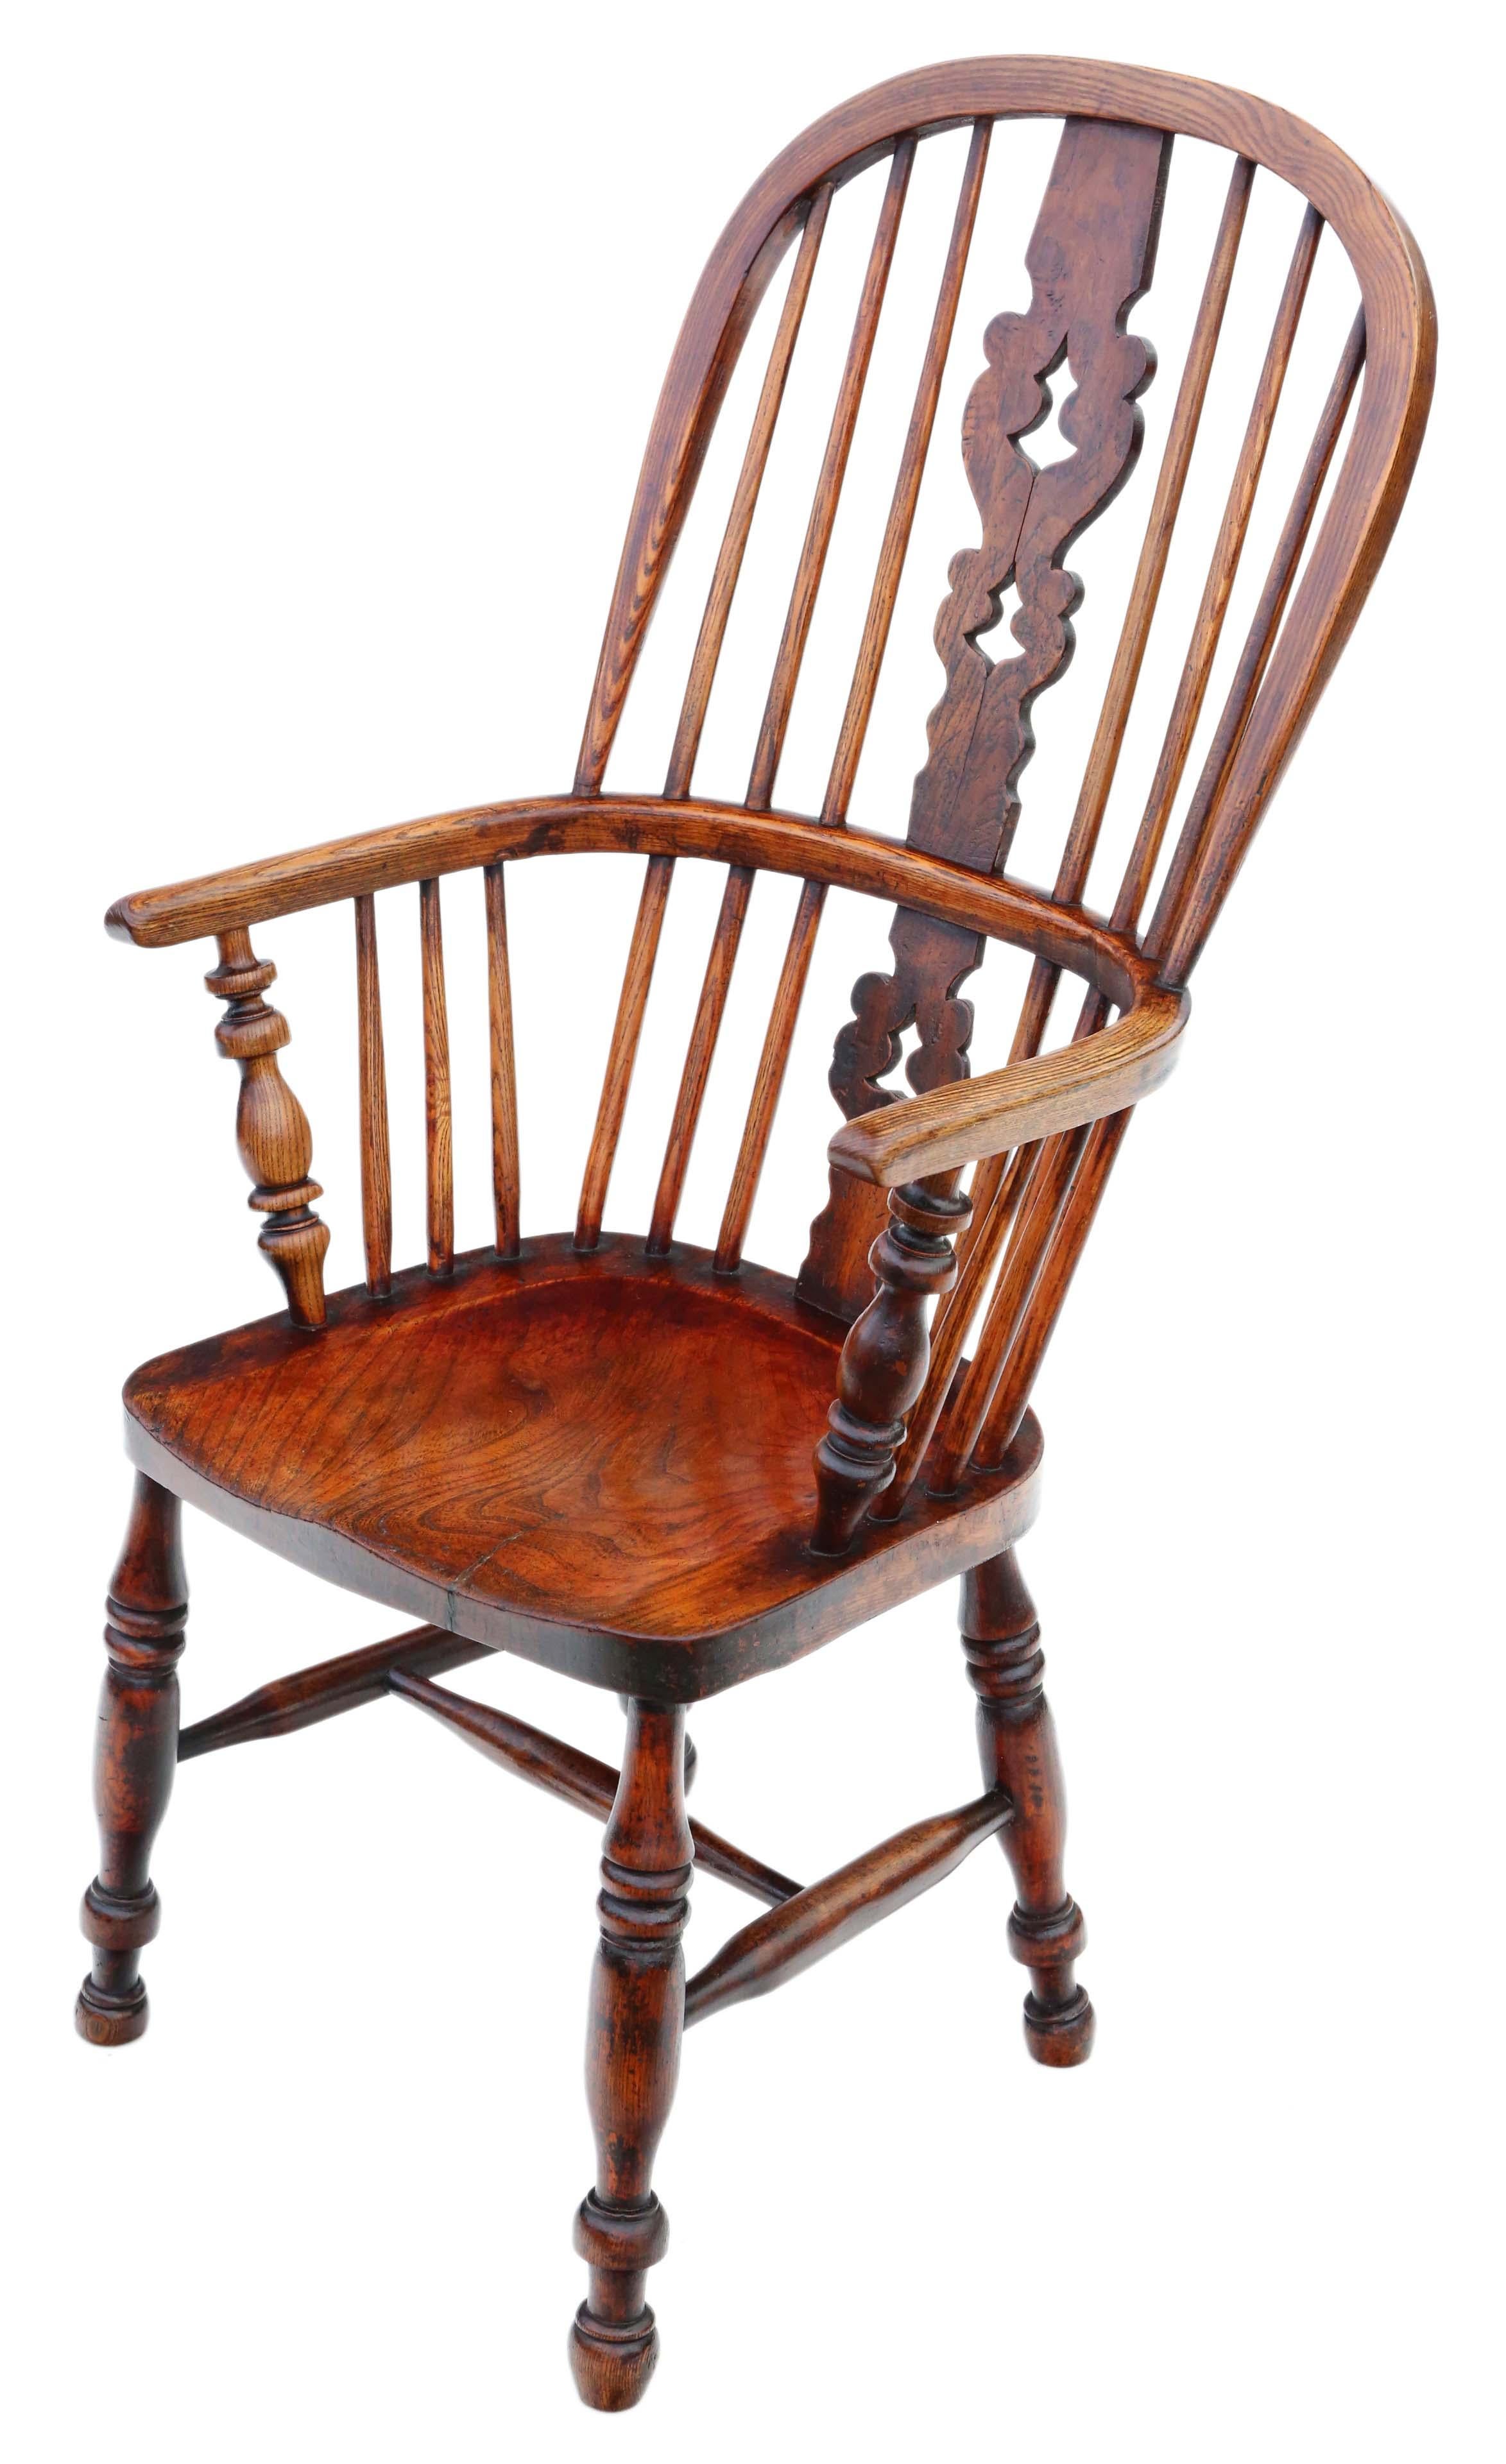 Antique Victorian C1860 ash and elm Windsor chair dining armchair.

Solid and strong, with no loose joints and no woodworm. Full of age, character and charm. Recently restored to a very good standard.

Would look great in the right